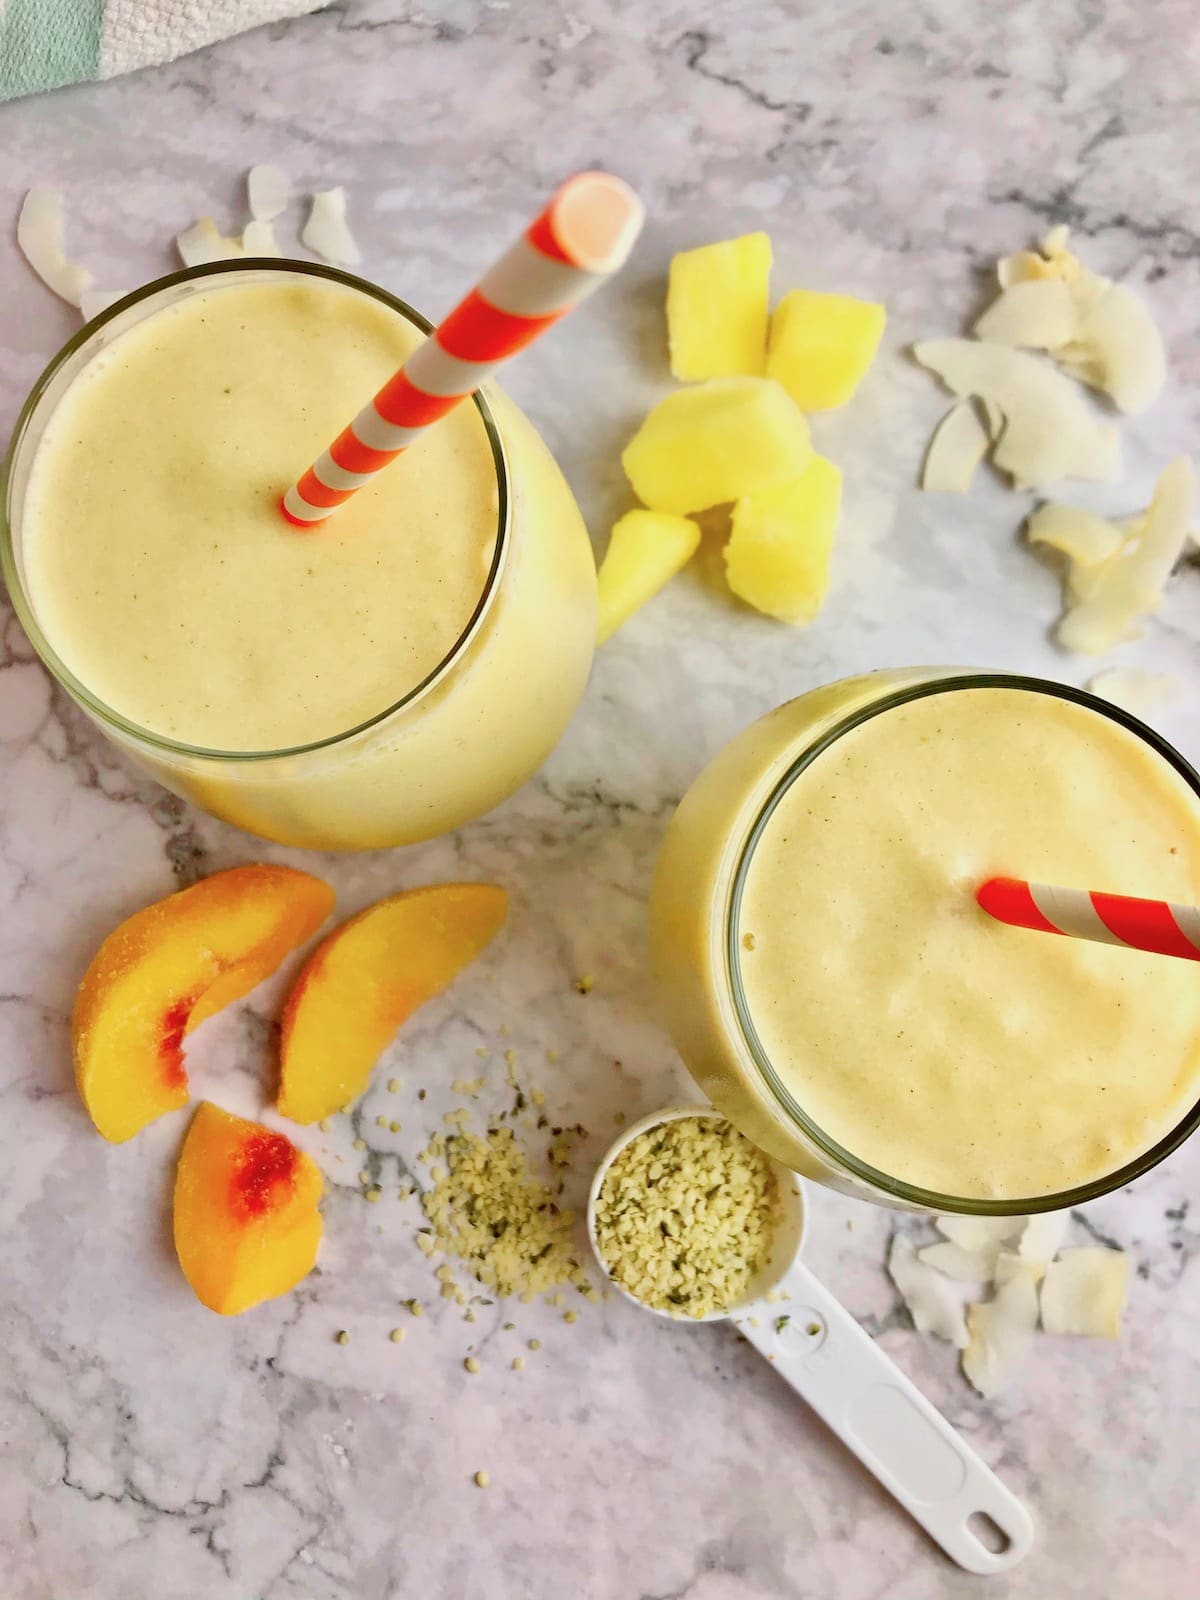 Two yellow pineapple peach smoothies with ingredients on the table, including fruit, coconut, and hemp seeds.